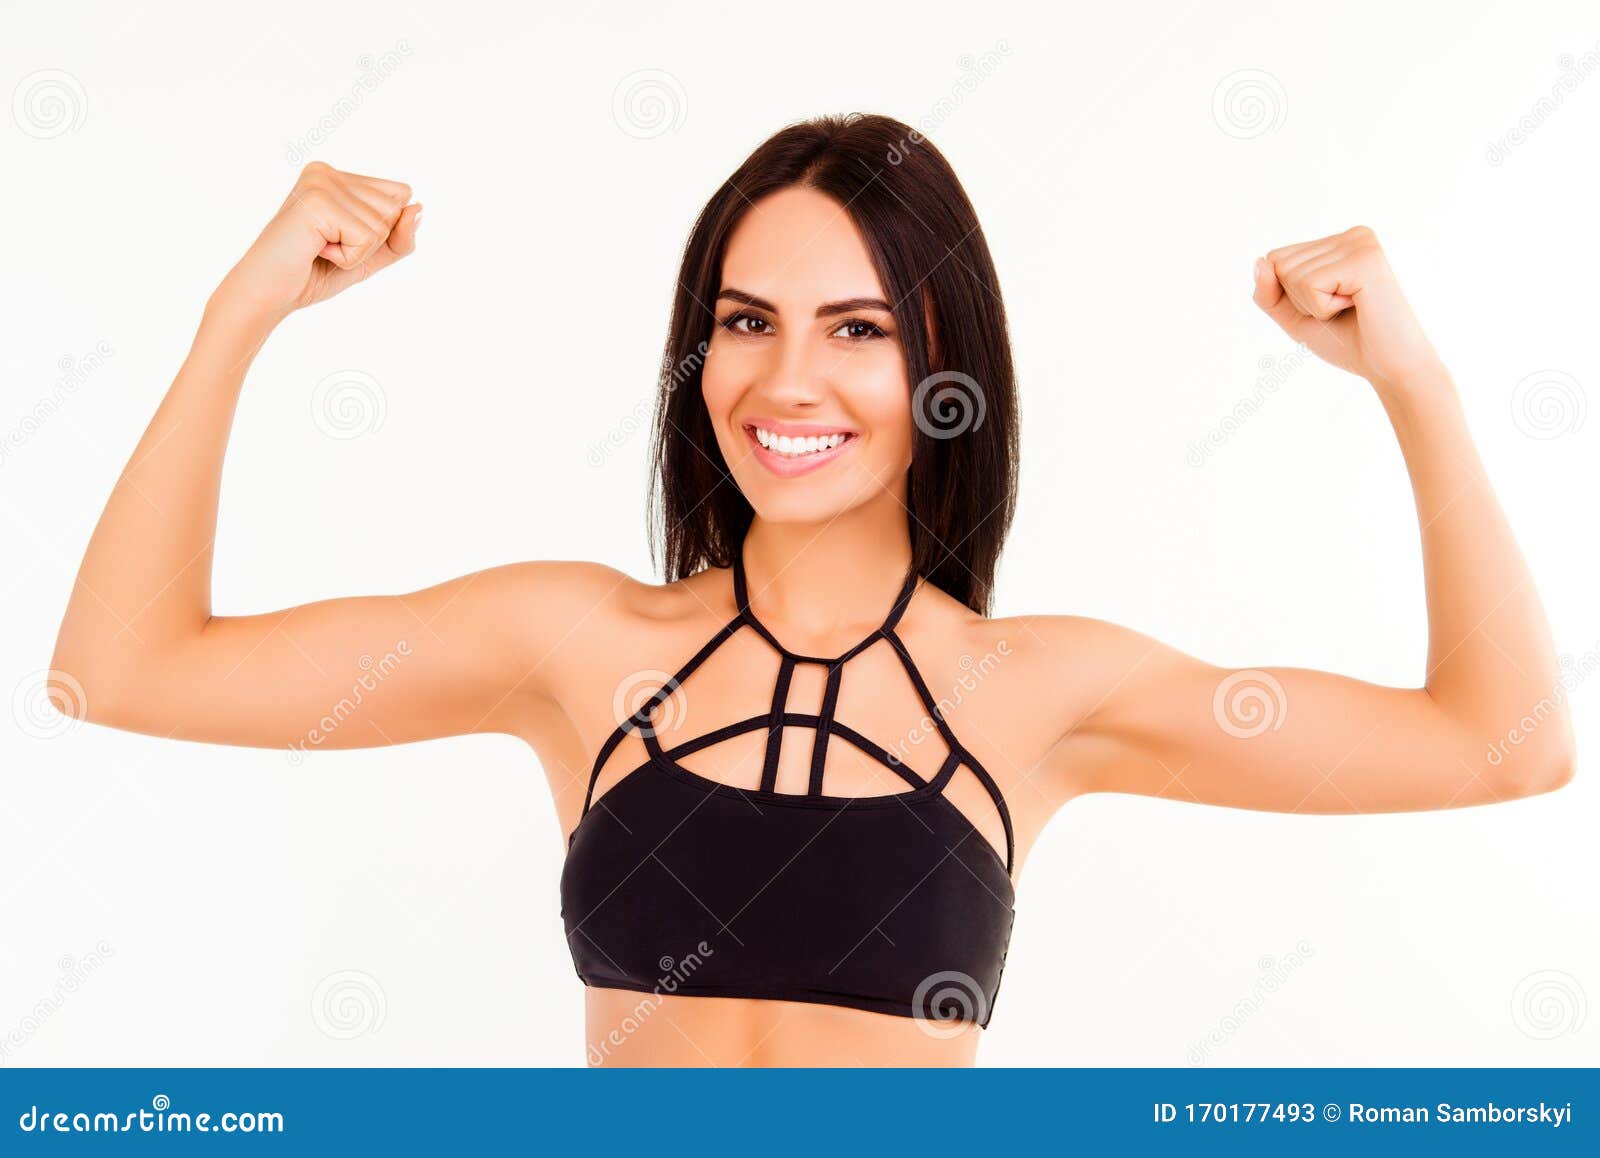 Healthy Fit Young Woman Demonstrating Her Strong Arms Stock Image